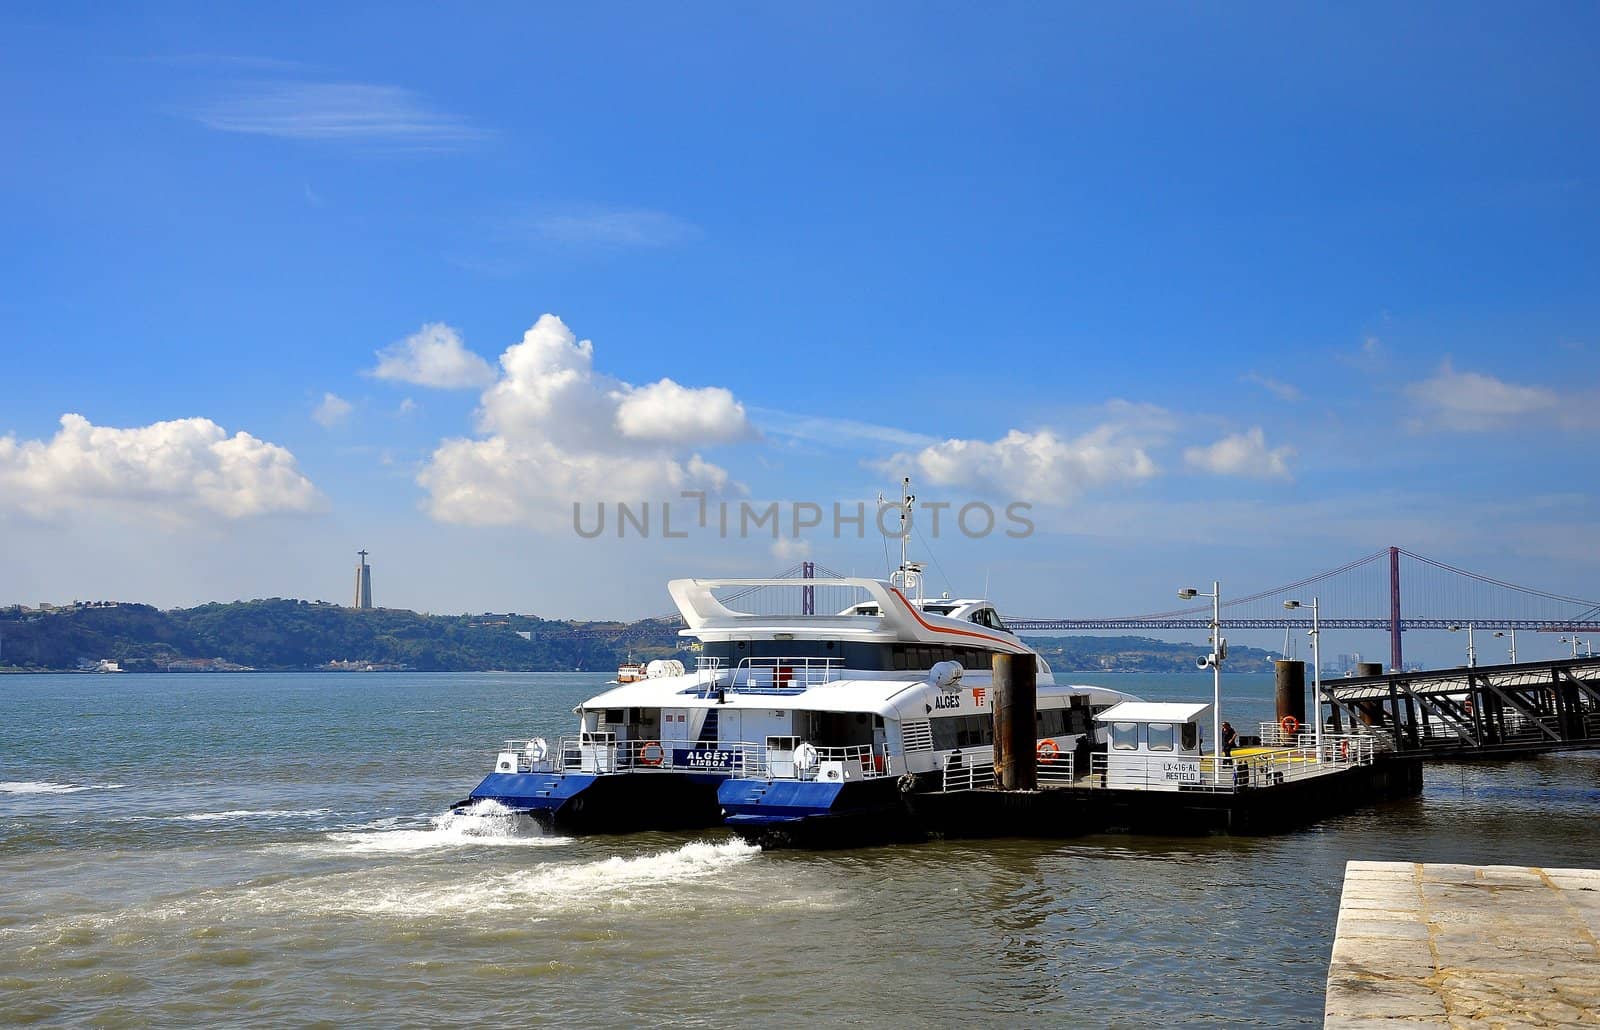 Transportation, the ferry on the river Tejo in Lisbon